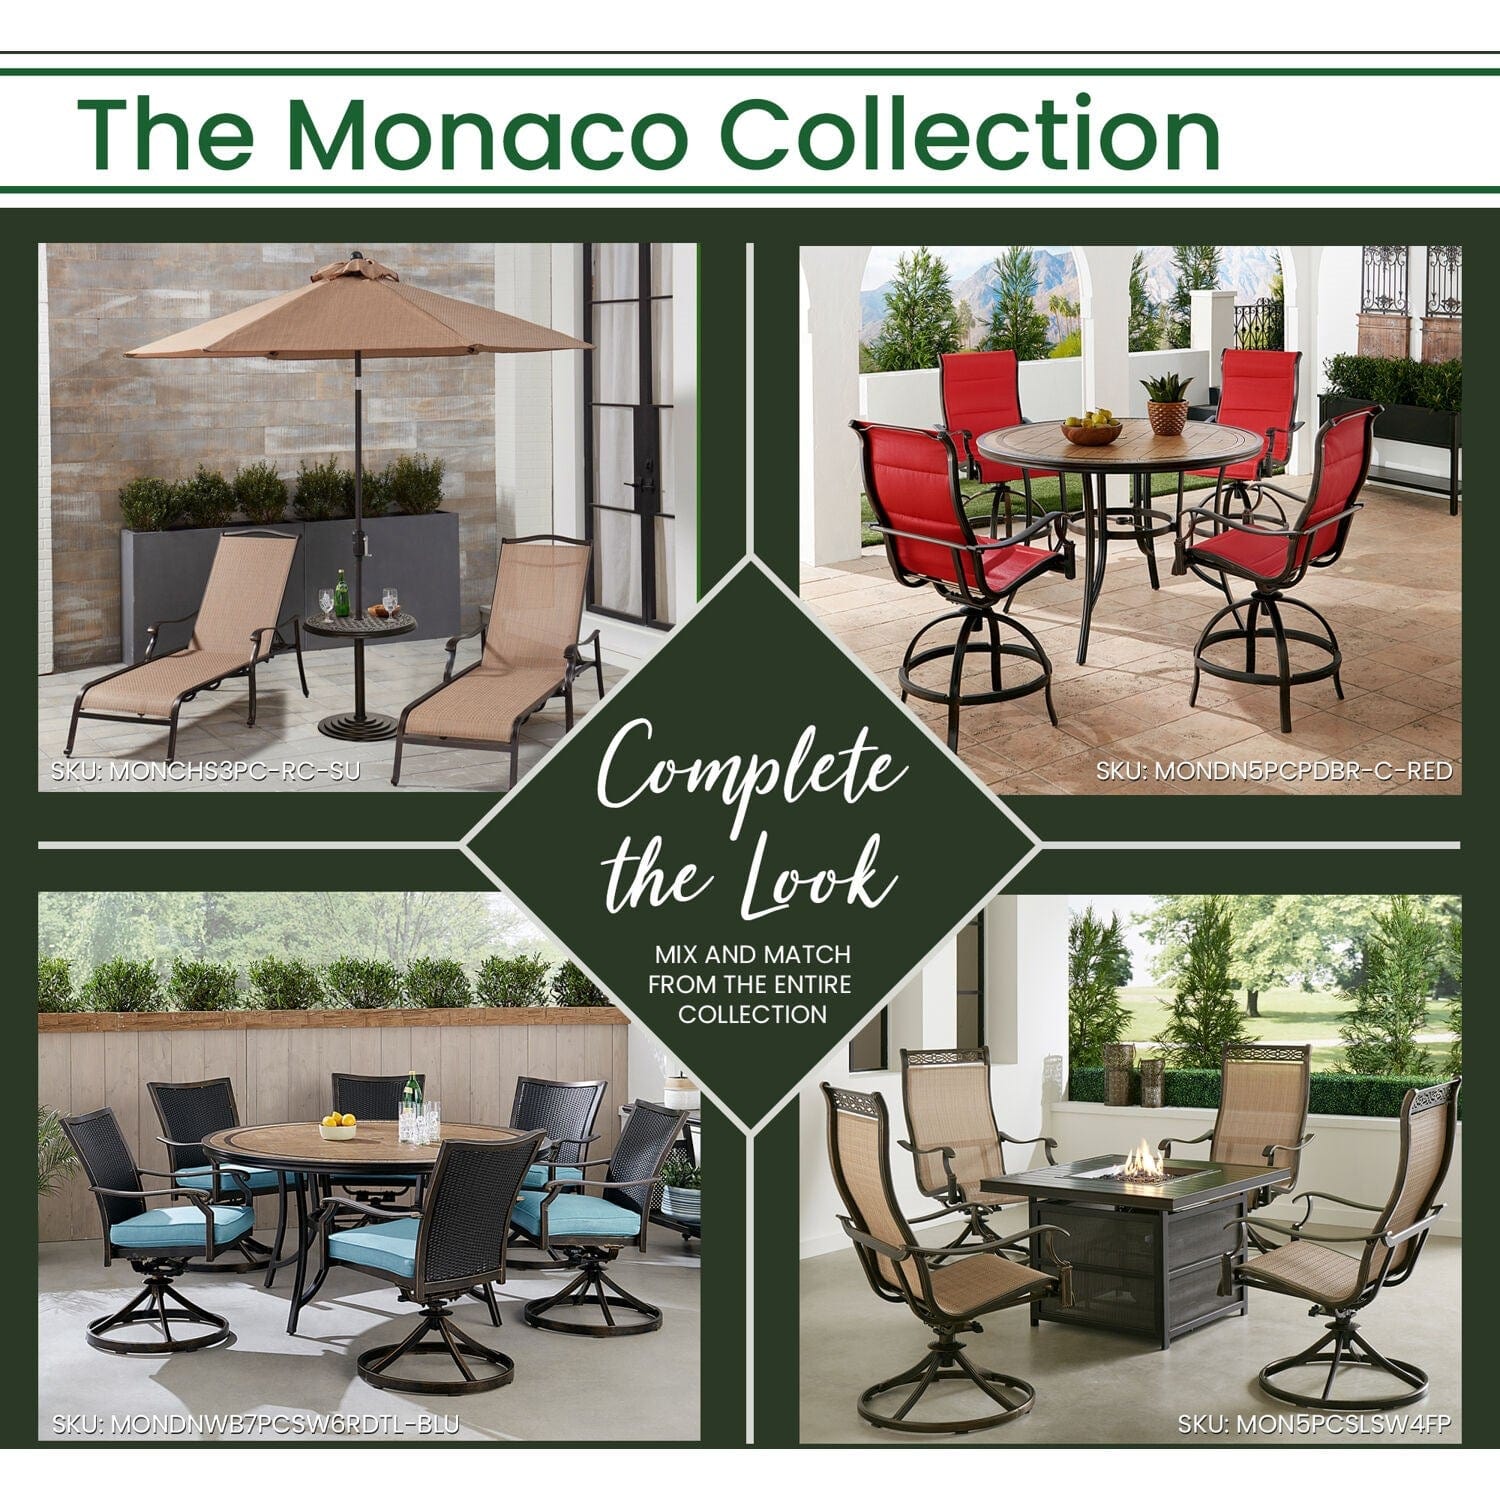 Hanover Outdoor Dining Set Hanover Monaco 5-Piece High-Dining Set in Blue with 4 Padded Counter-Height Swivel Chairs and a 56-In. Tile-Top Table | MONDN5PCPDBR-C-BLU